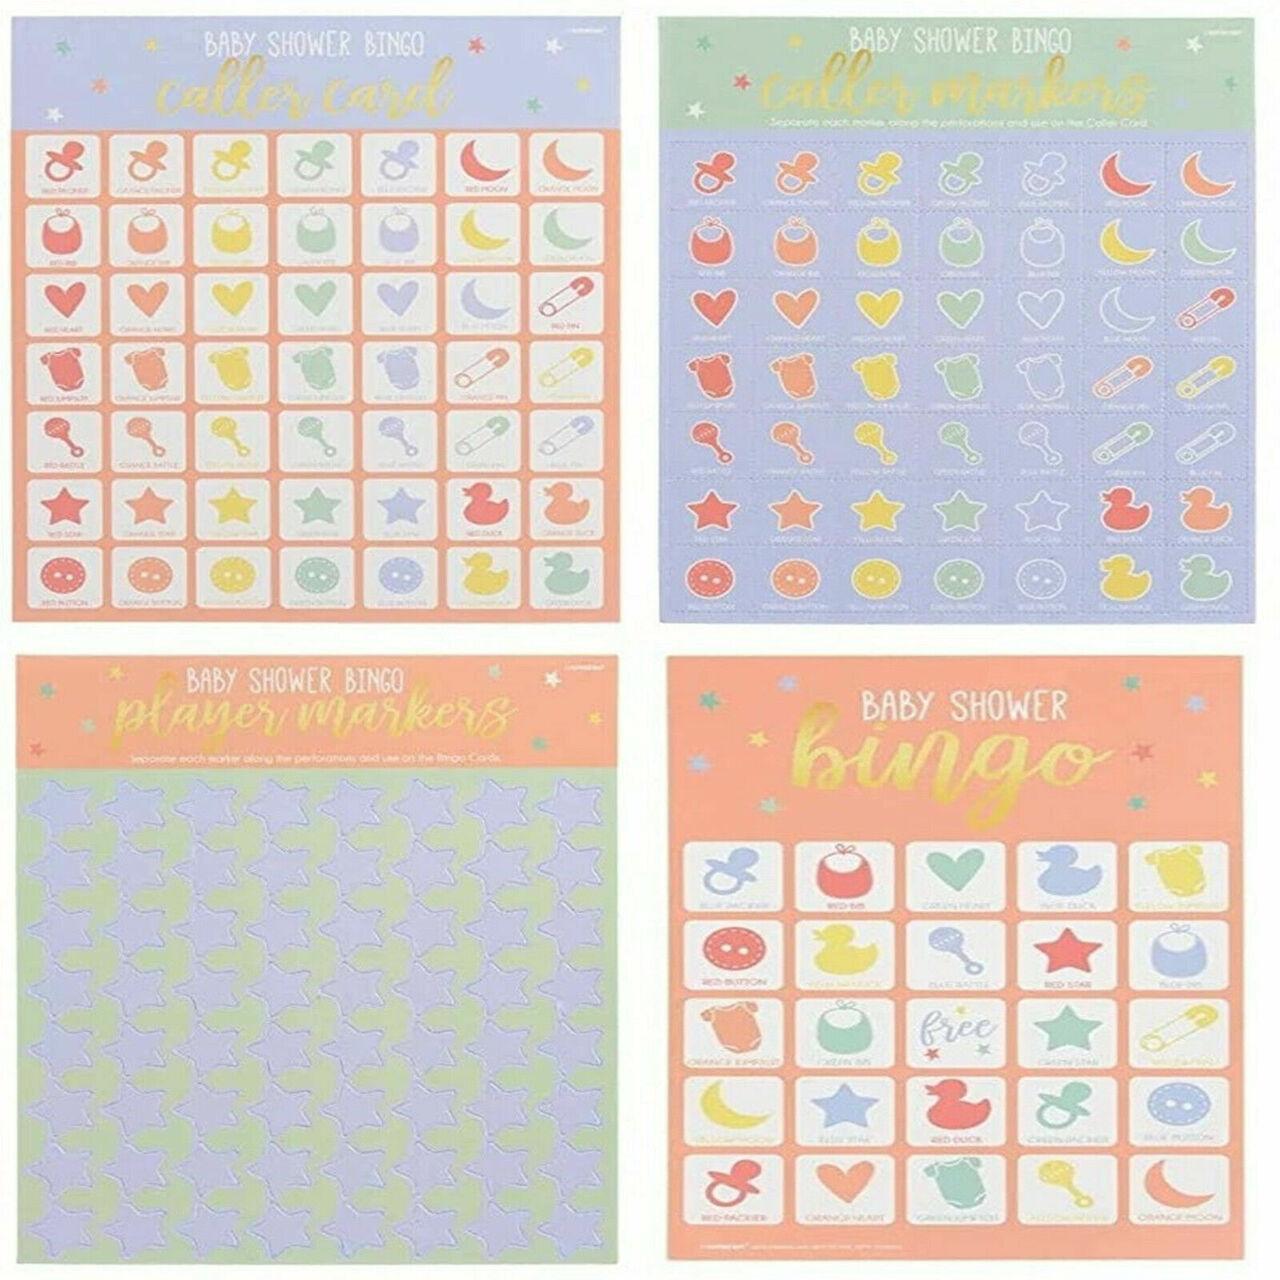 Baby Shower Party Games Bingo Activity Sheets Cards Unisex Mum to Be